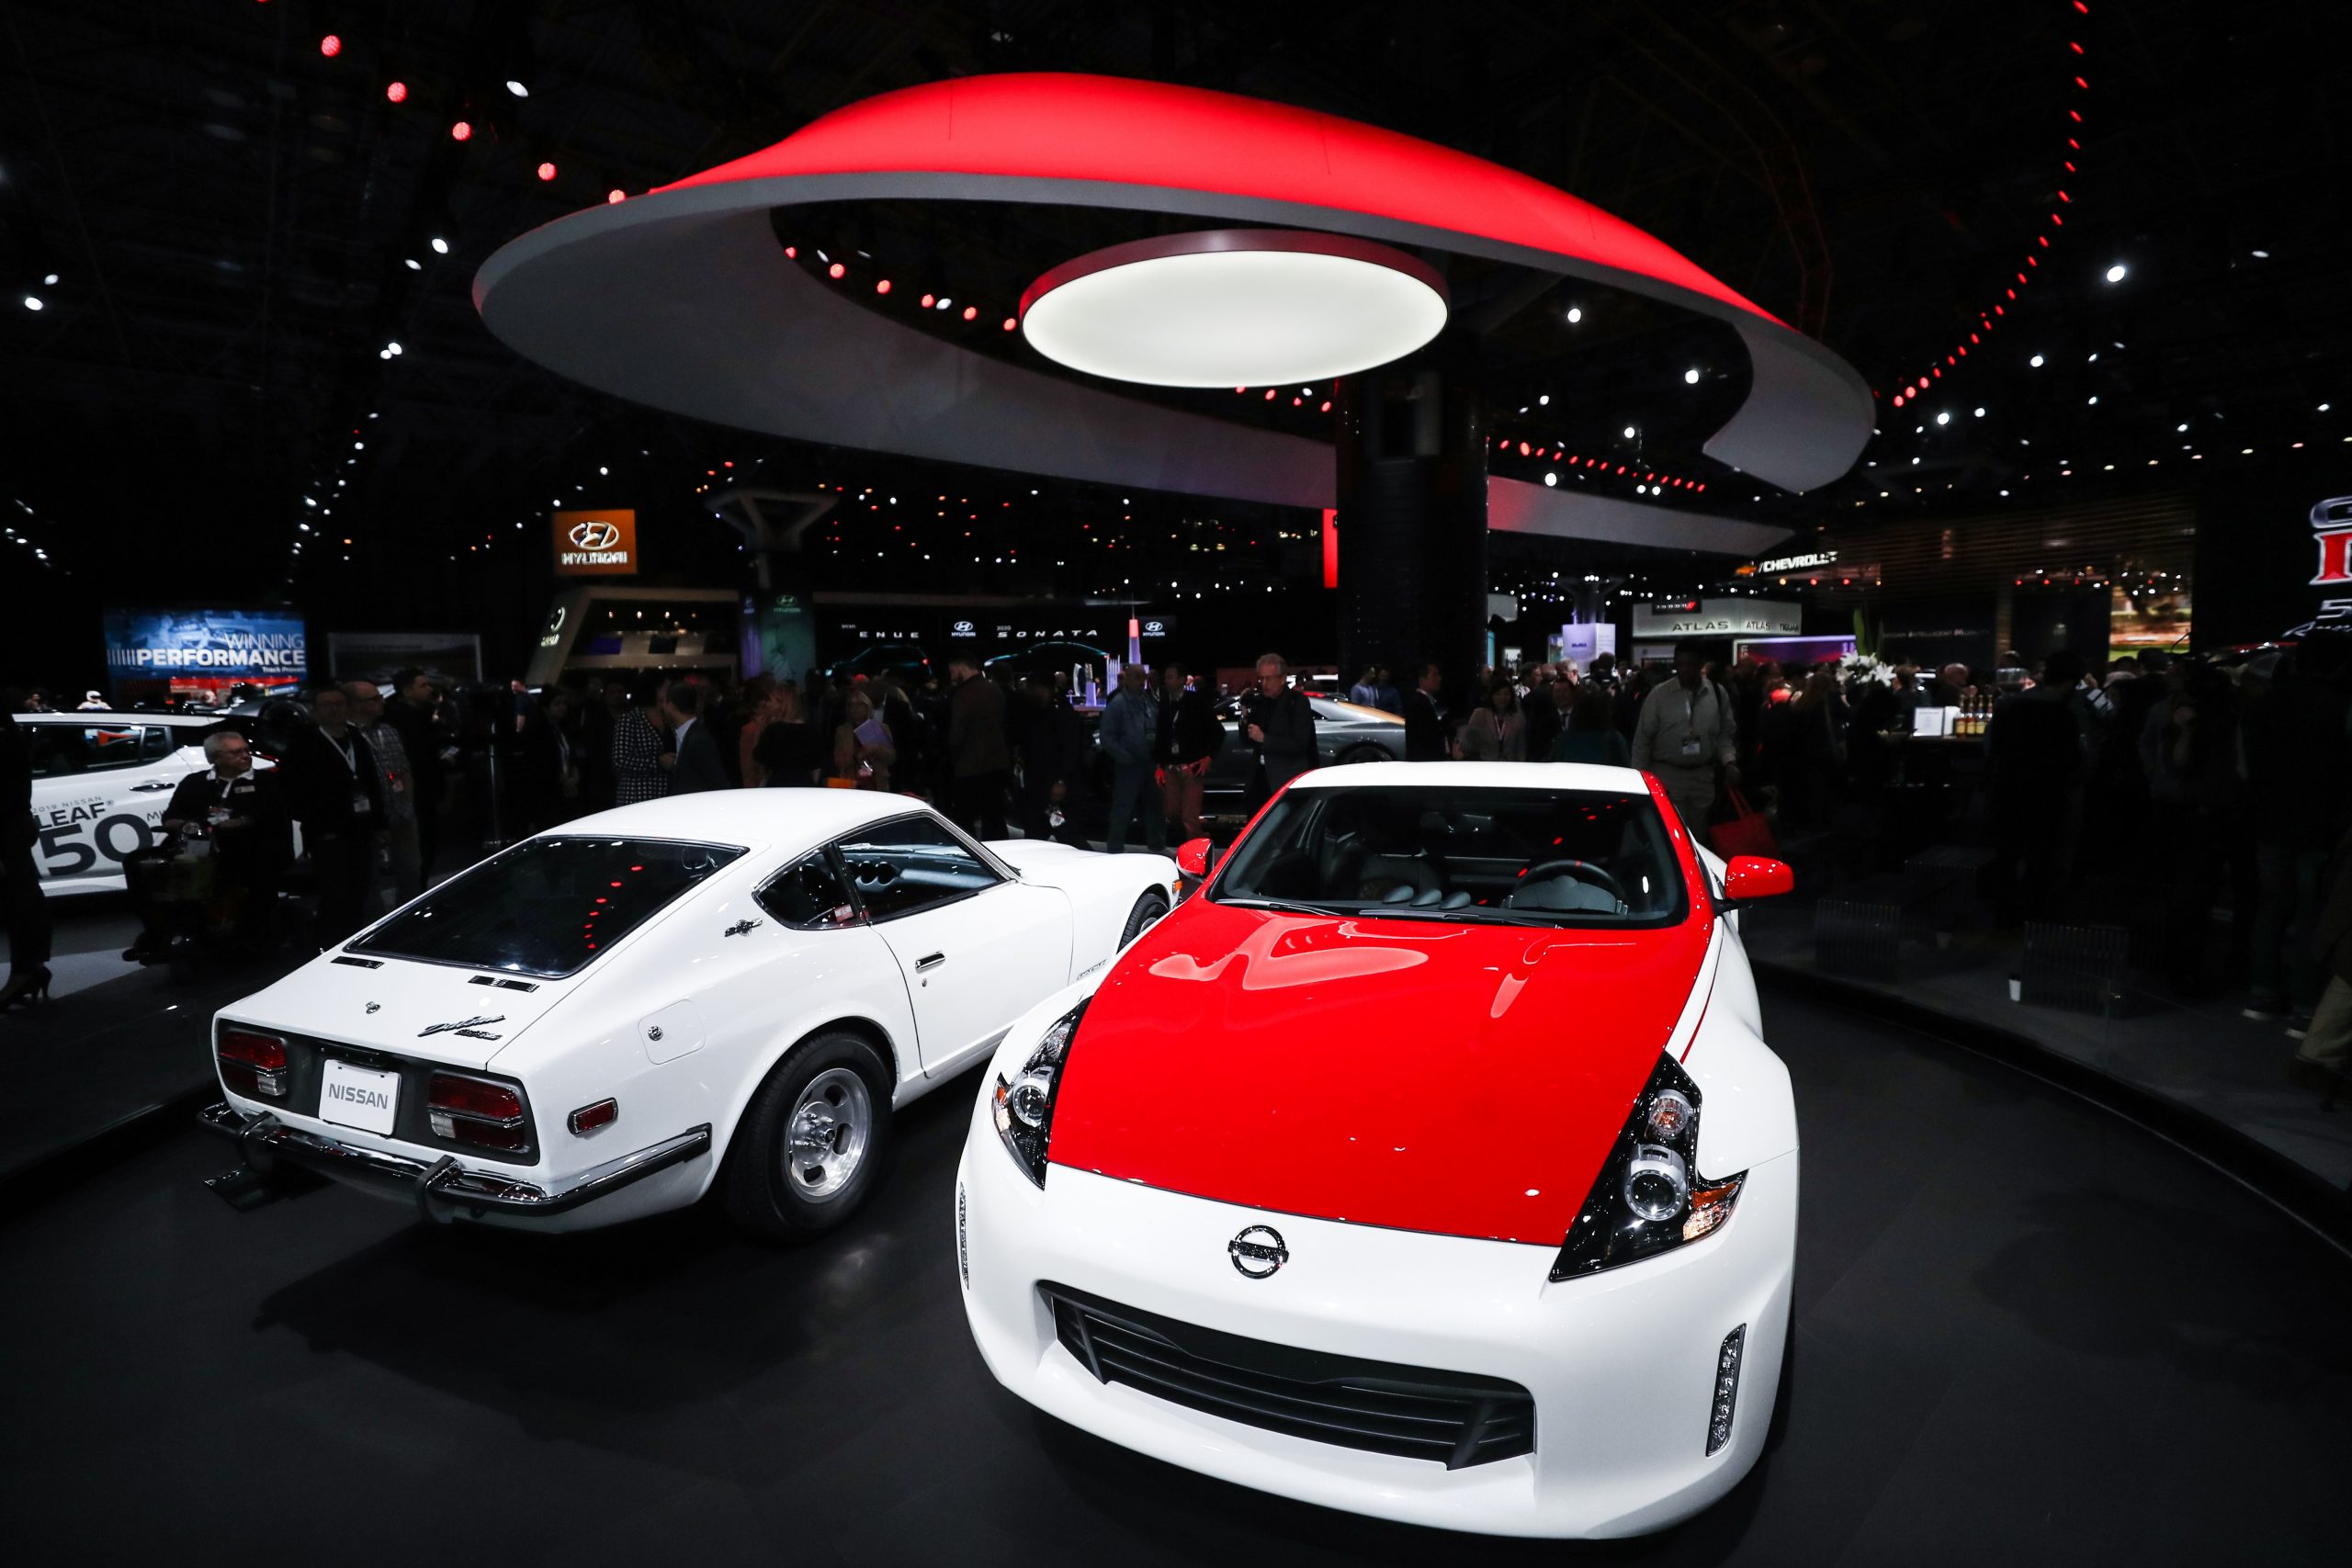 A 2020 Nissan 370Z on display at an auto show